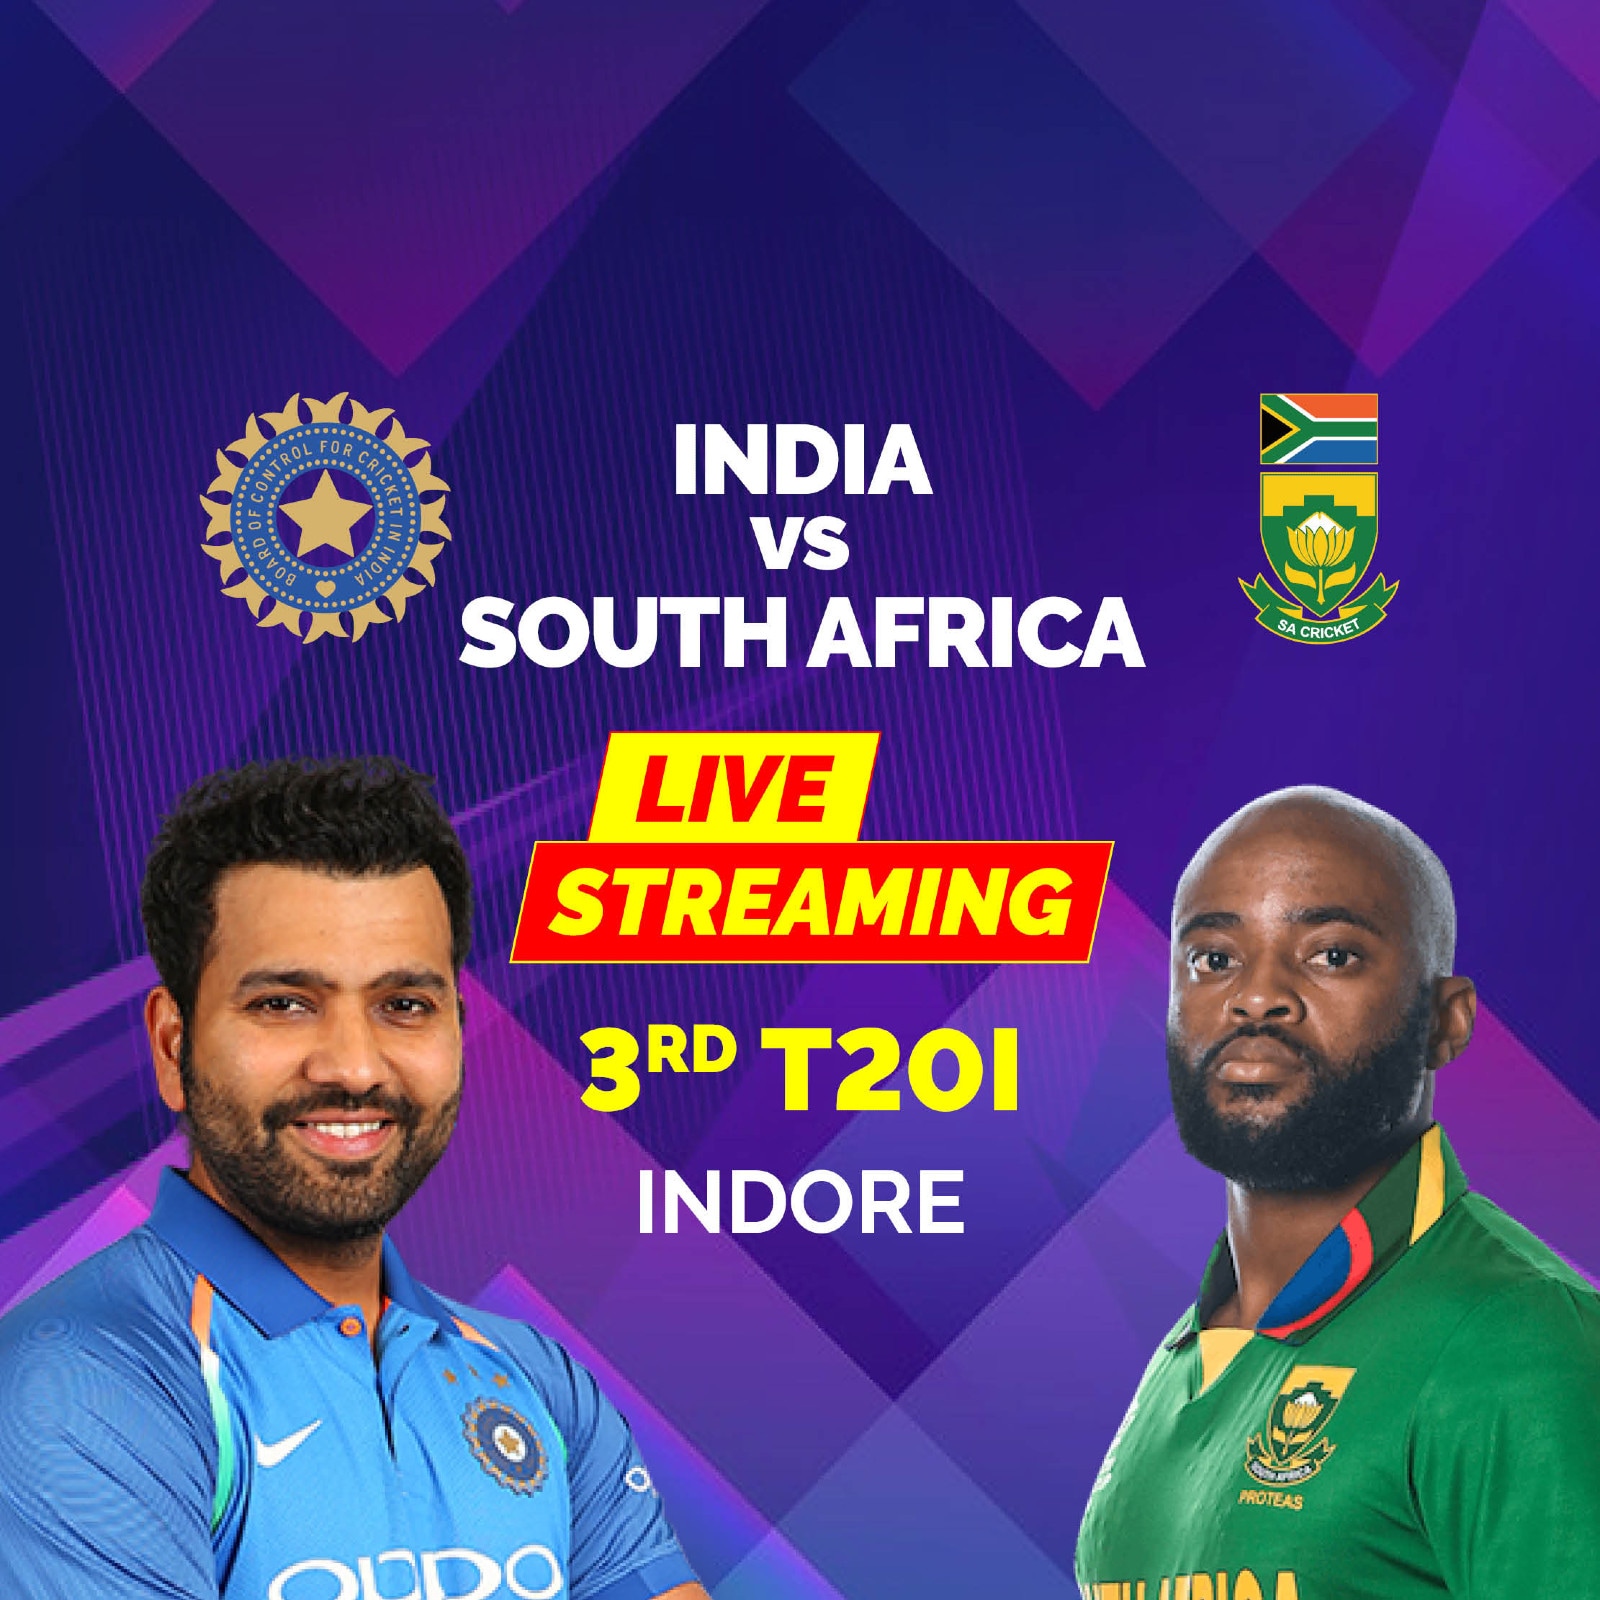 India vs South Africa Live Streaming Cricket: When and Where to